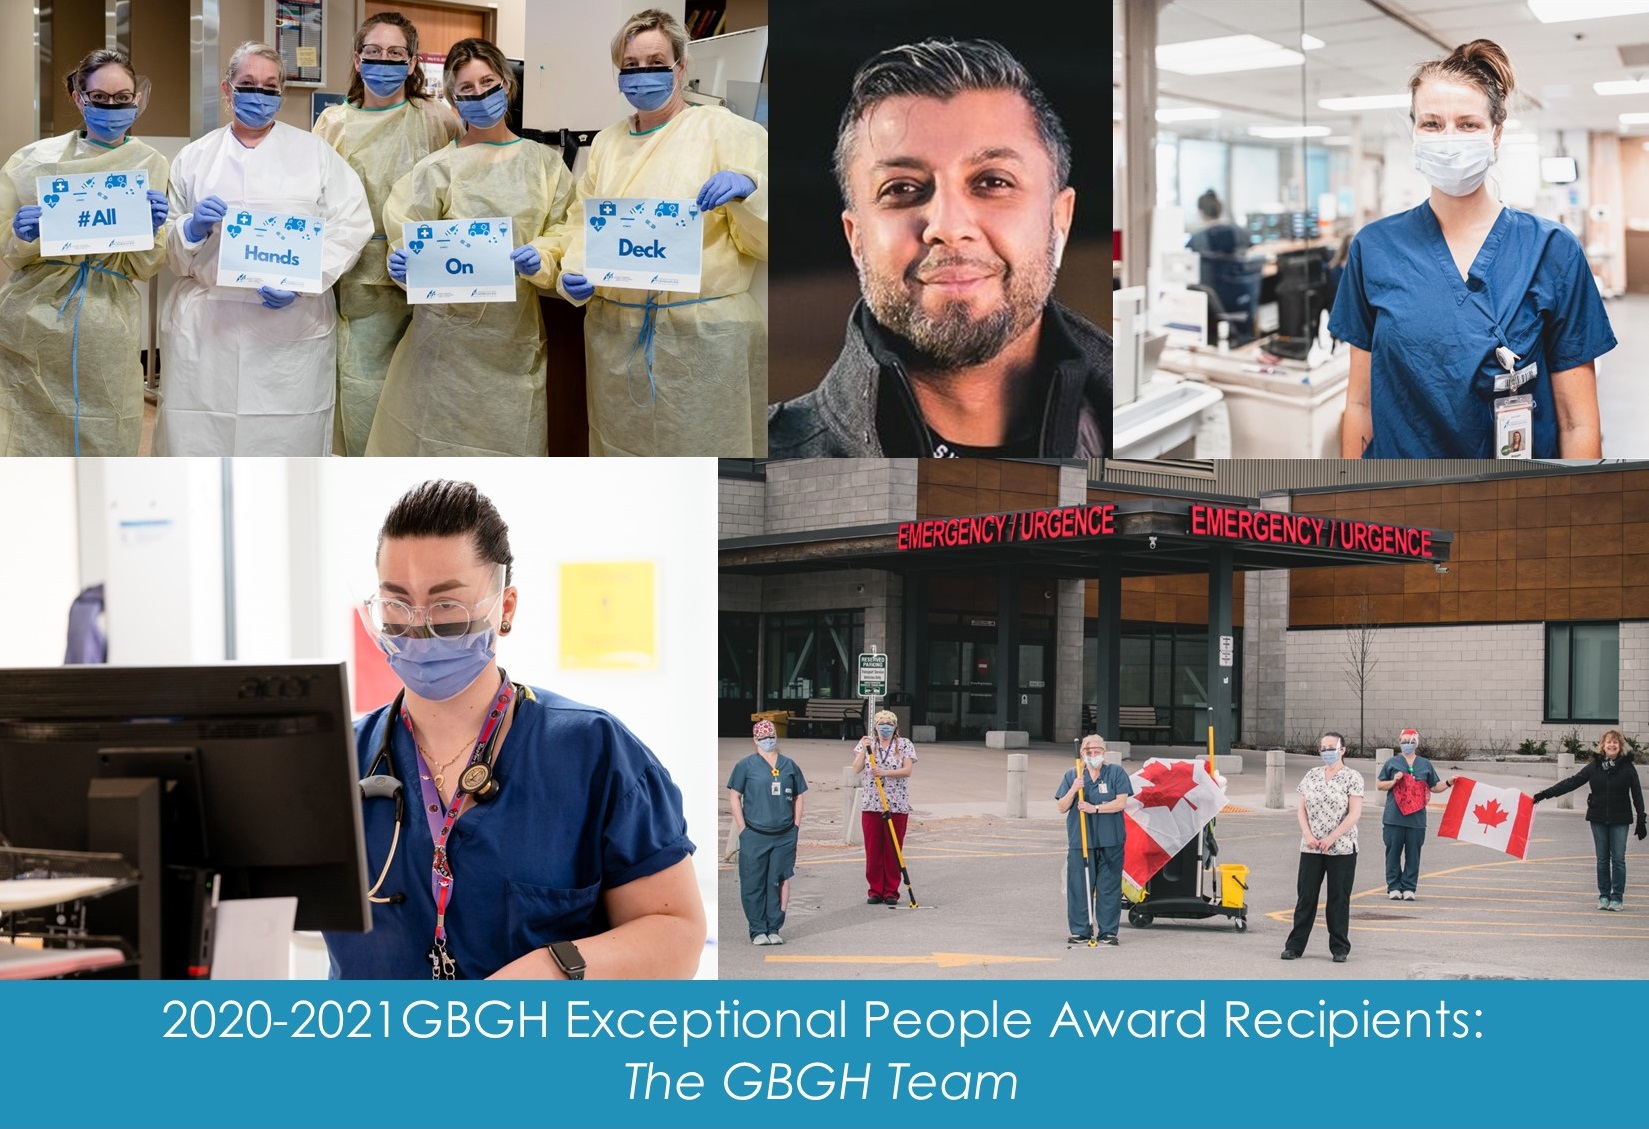 Board of Directors names entire GBGH team as Exceptional People Award recipients